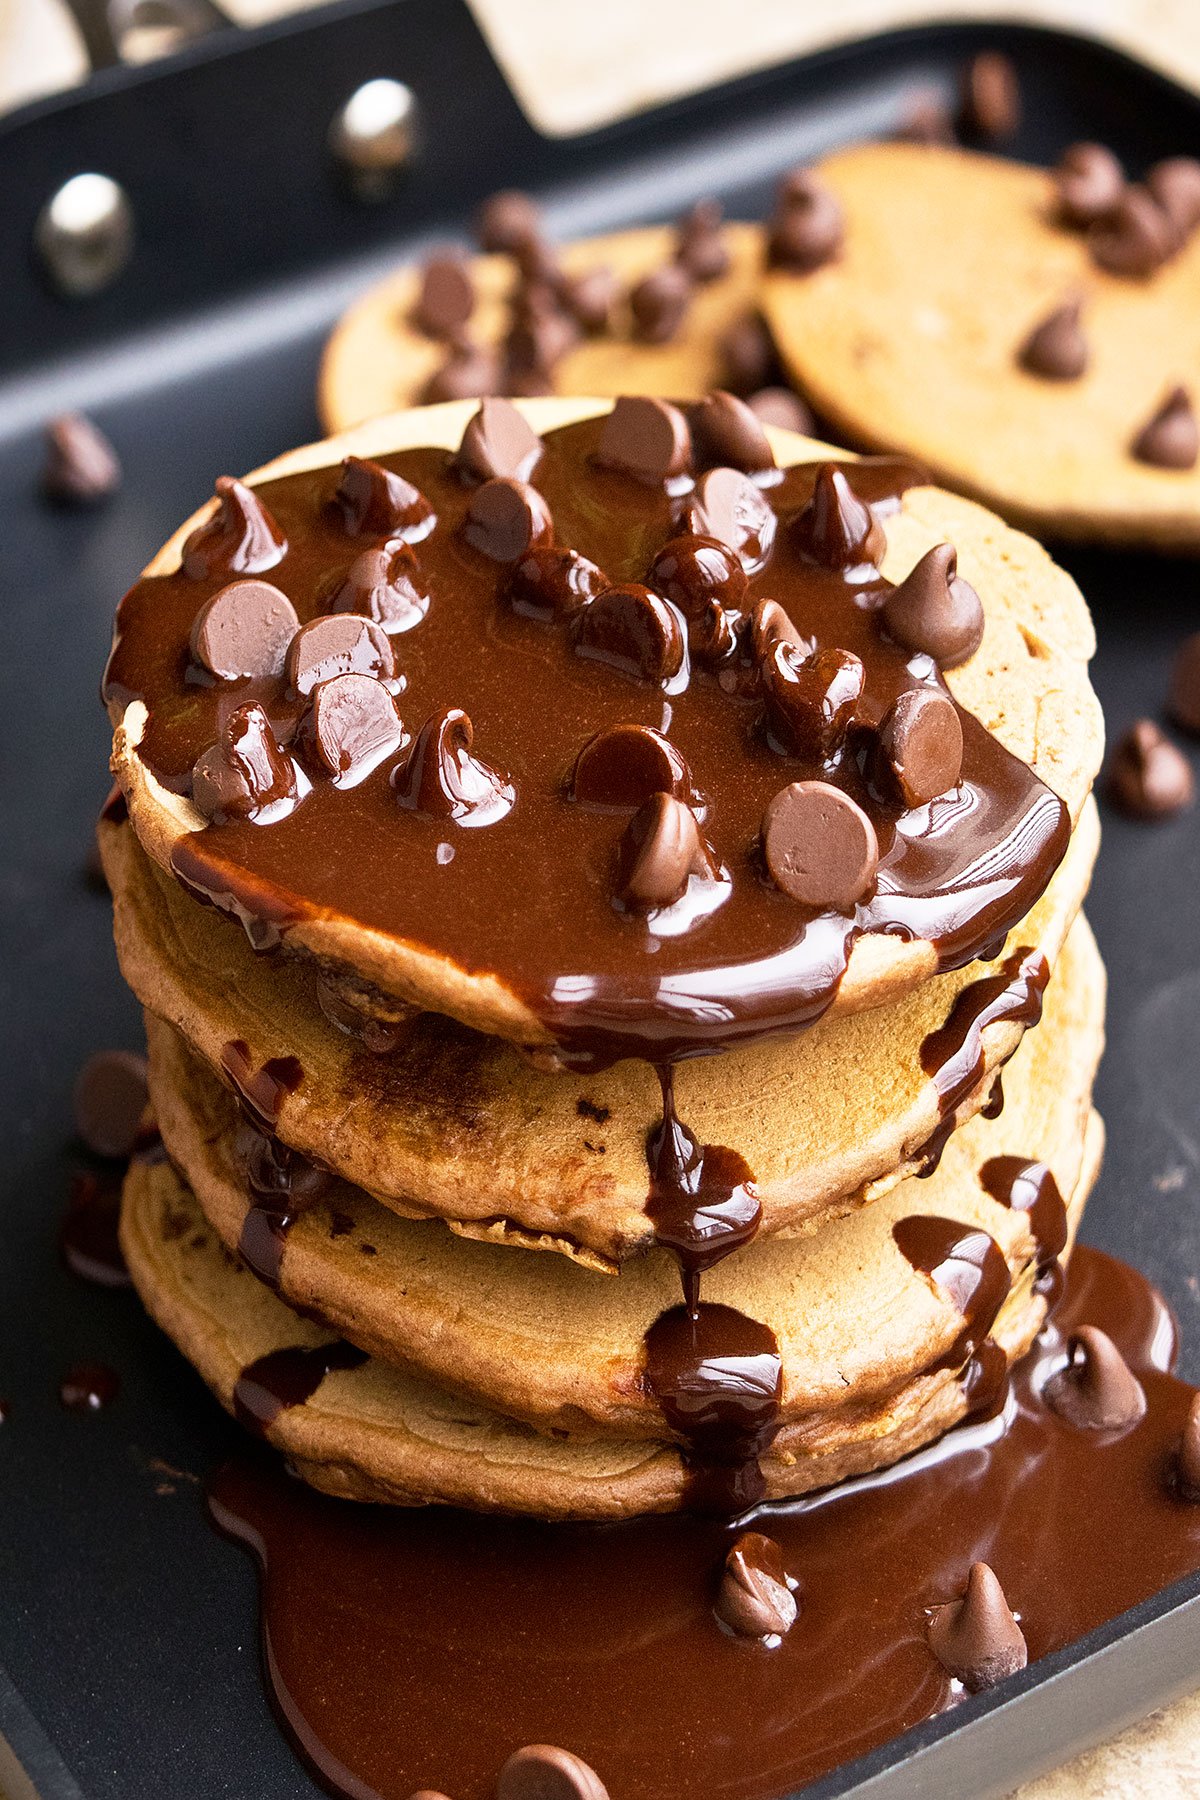 Stack of Easy Coffee Pancakes With Mocha Sauce/ Syrup and Chocolate Chips on Black Pan. 